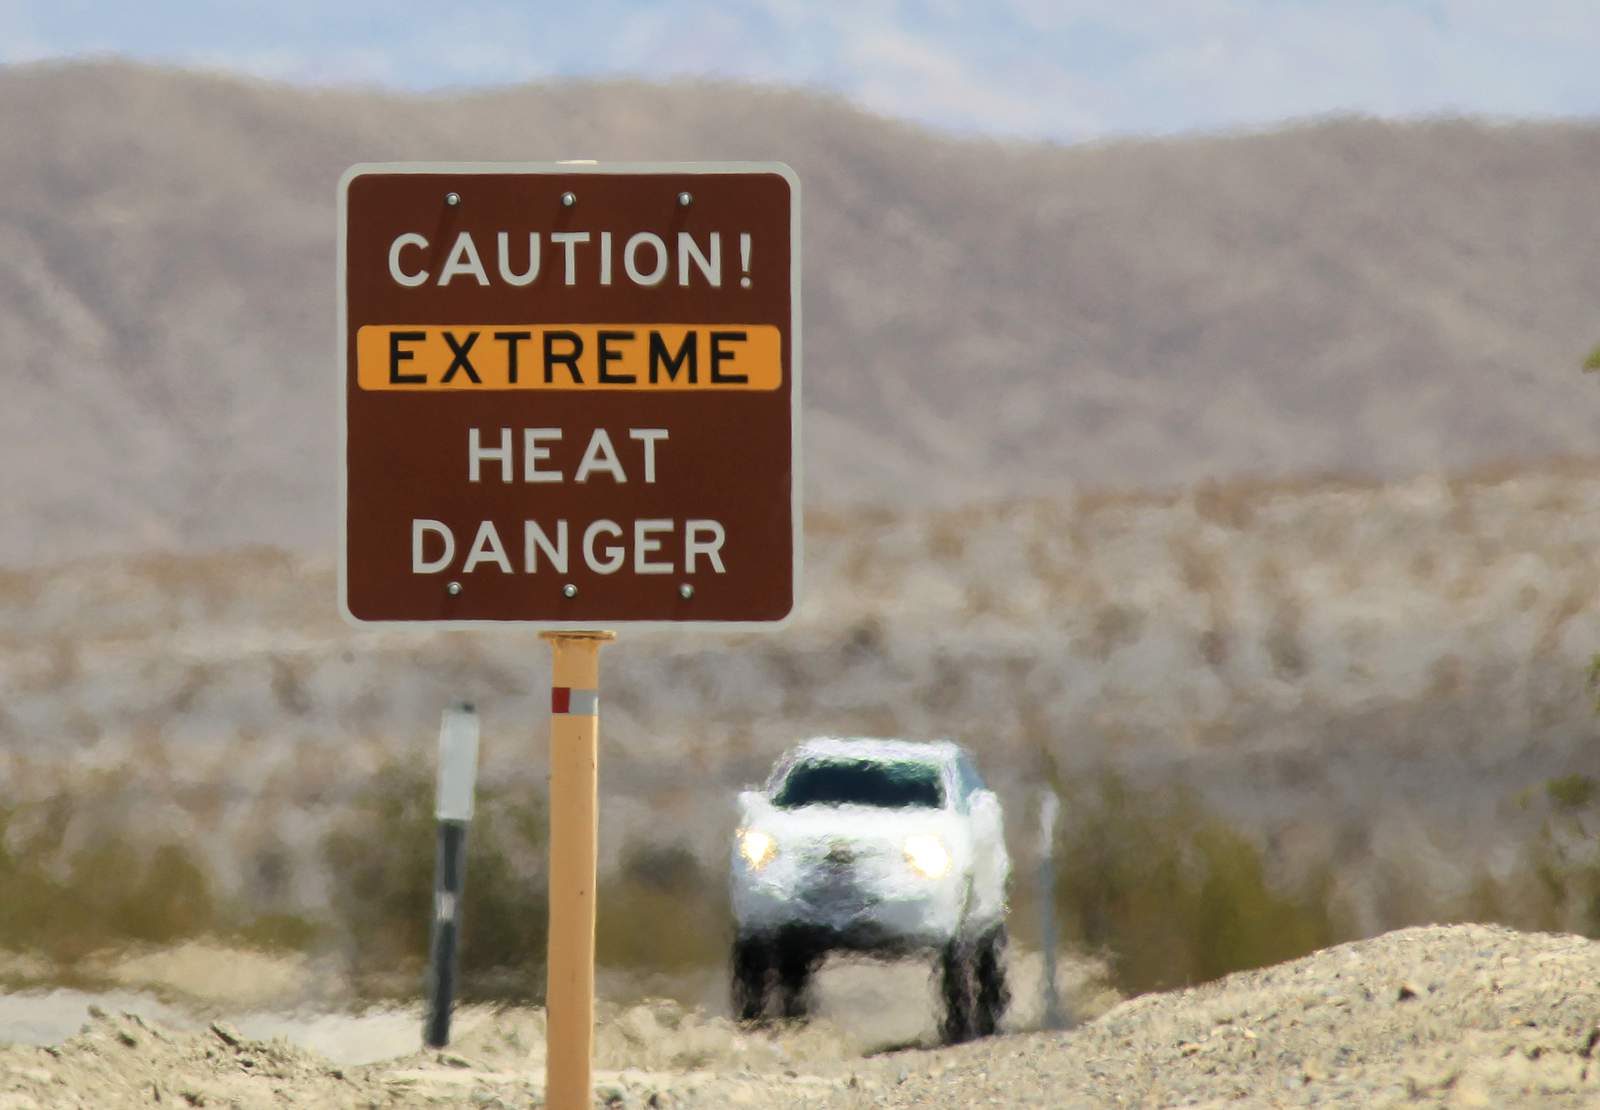 Meteorologists seek to confirm 130-degree Death Valley temp